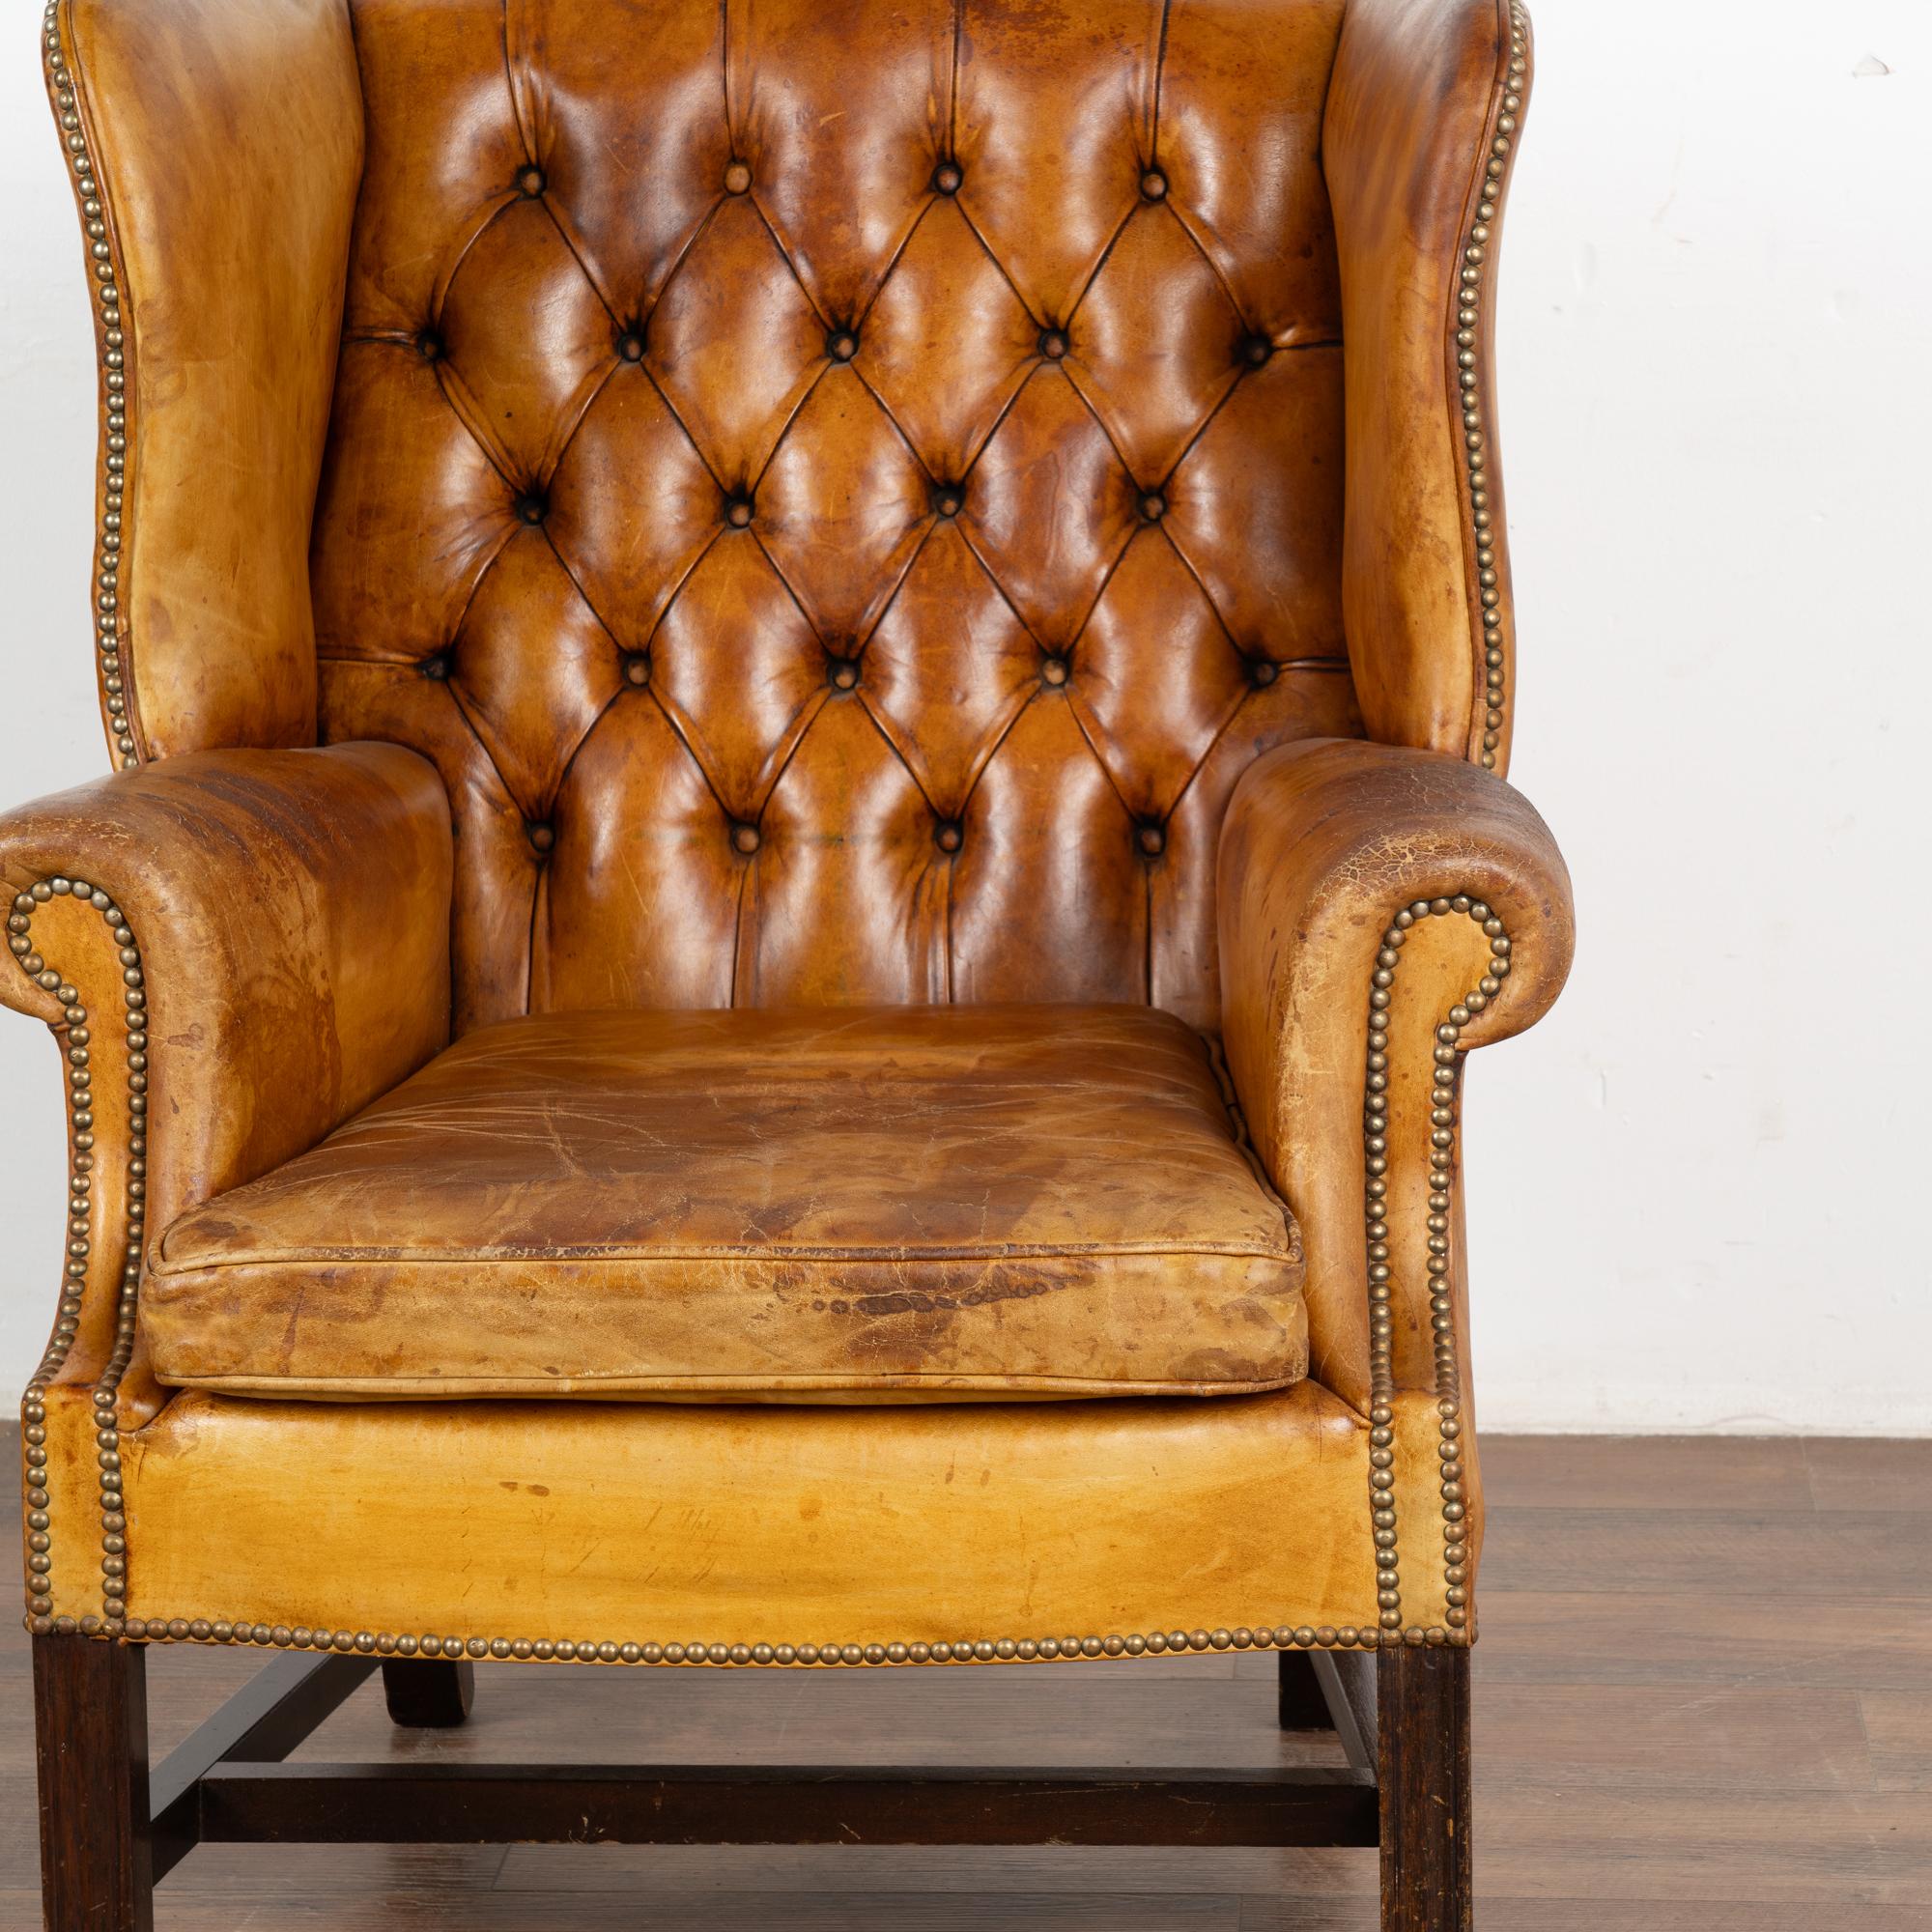 20th Century Vintage Brown Leather Wingback Chesterfield Arm Chair, England circa 1940 For Sale